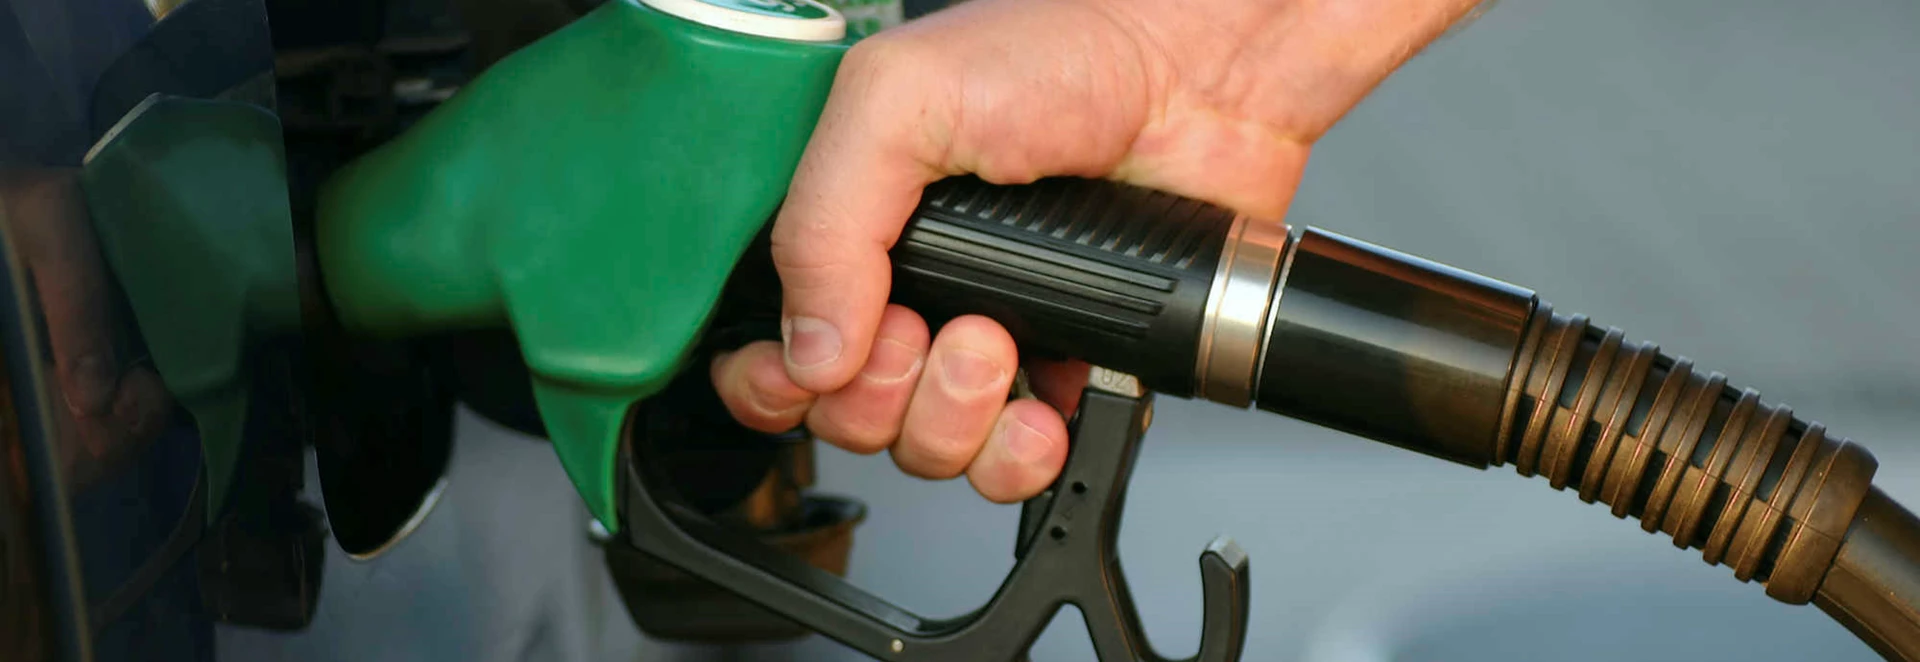 Unleaded and Super Unleaded Fuel Explained 